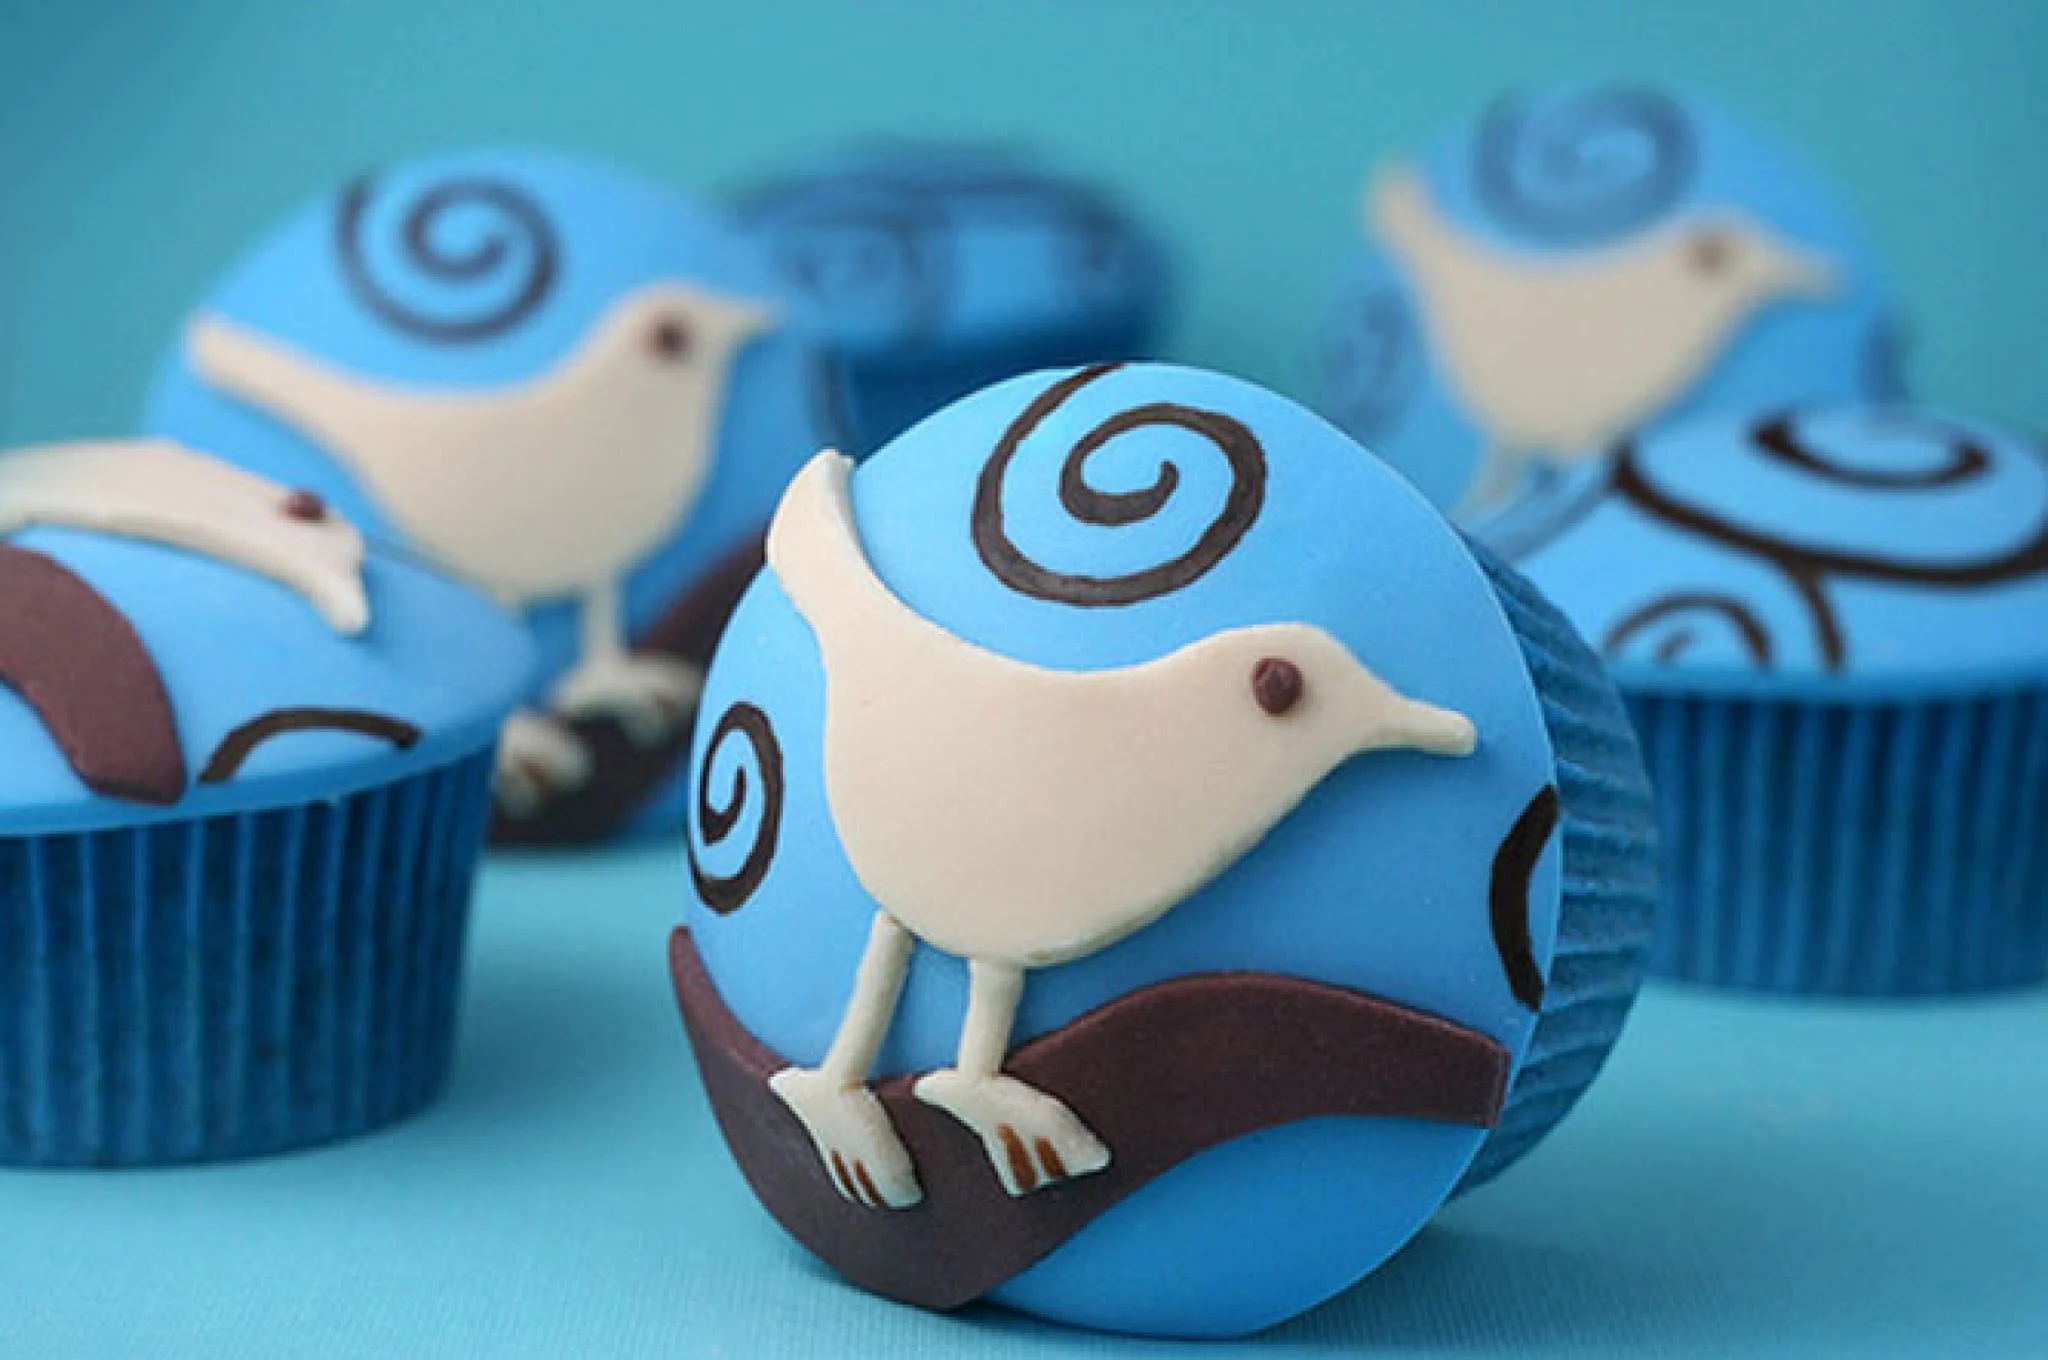 20+ Do's and Don'ts of Twitter Etiquette [INFOGRAPHIC]